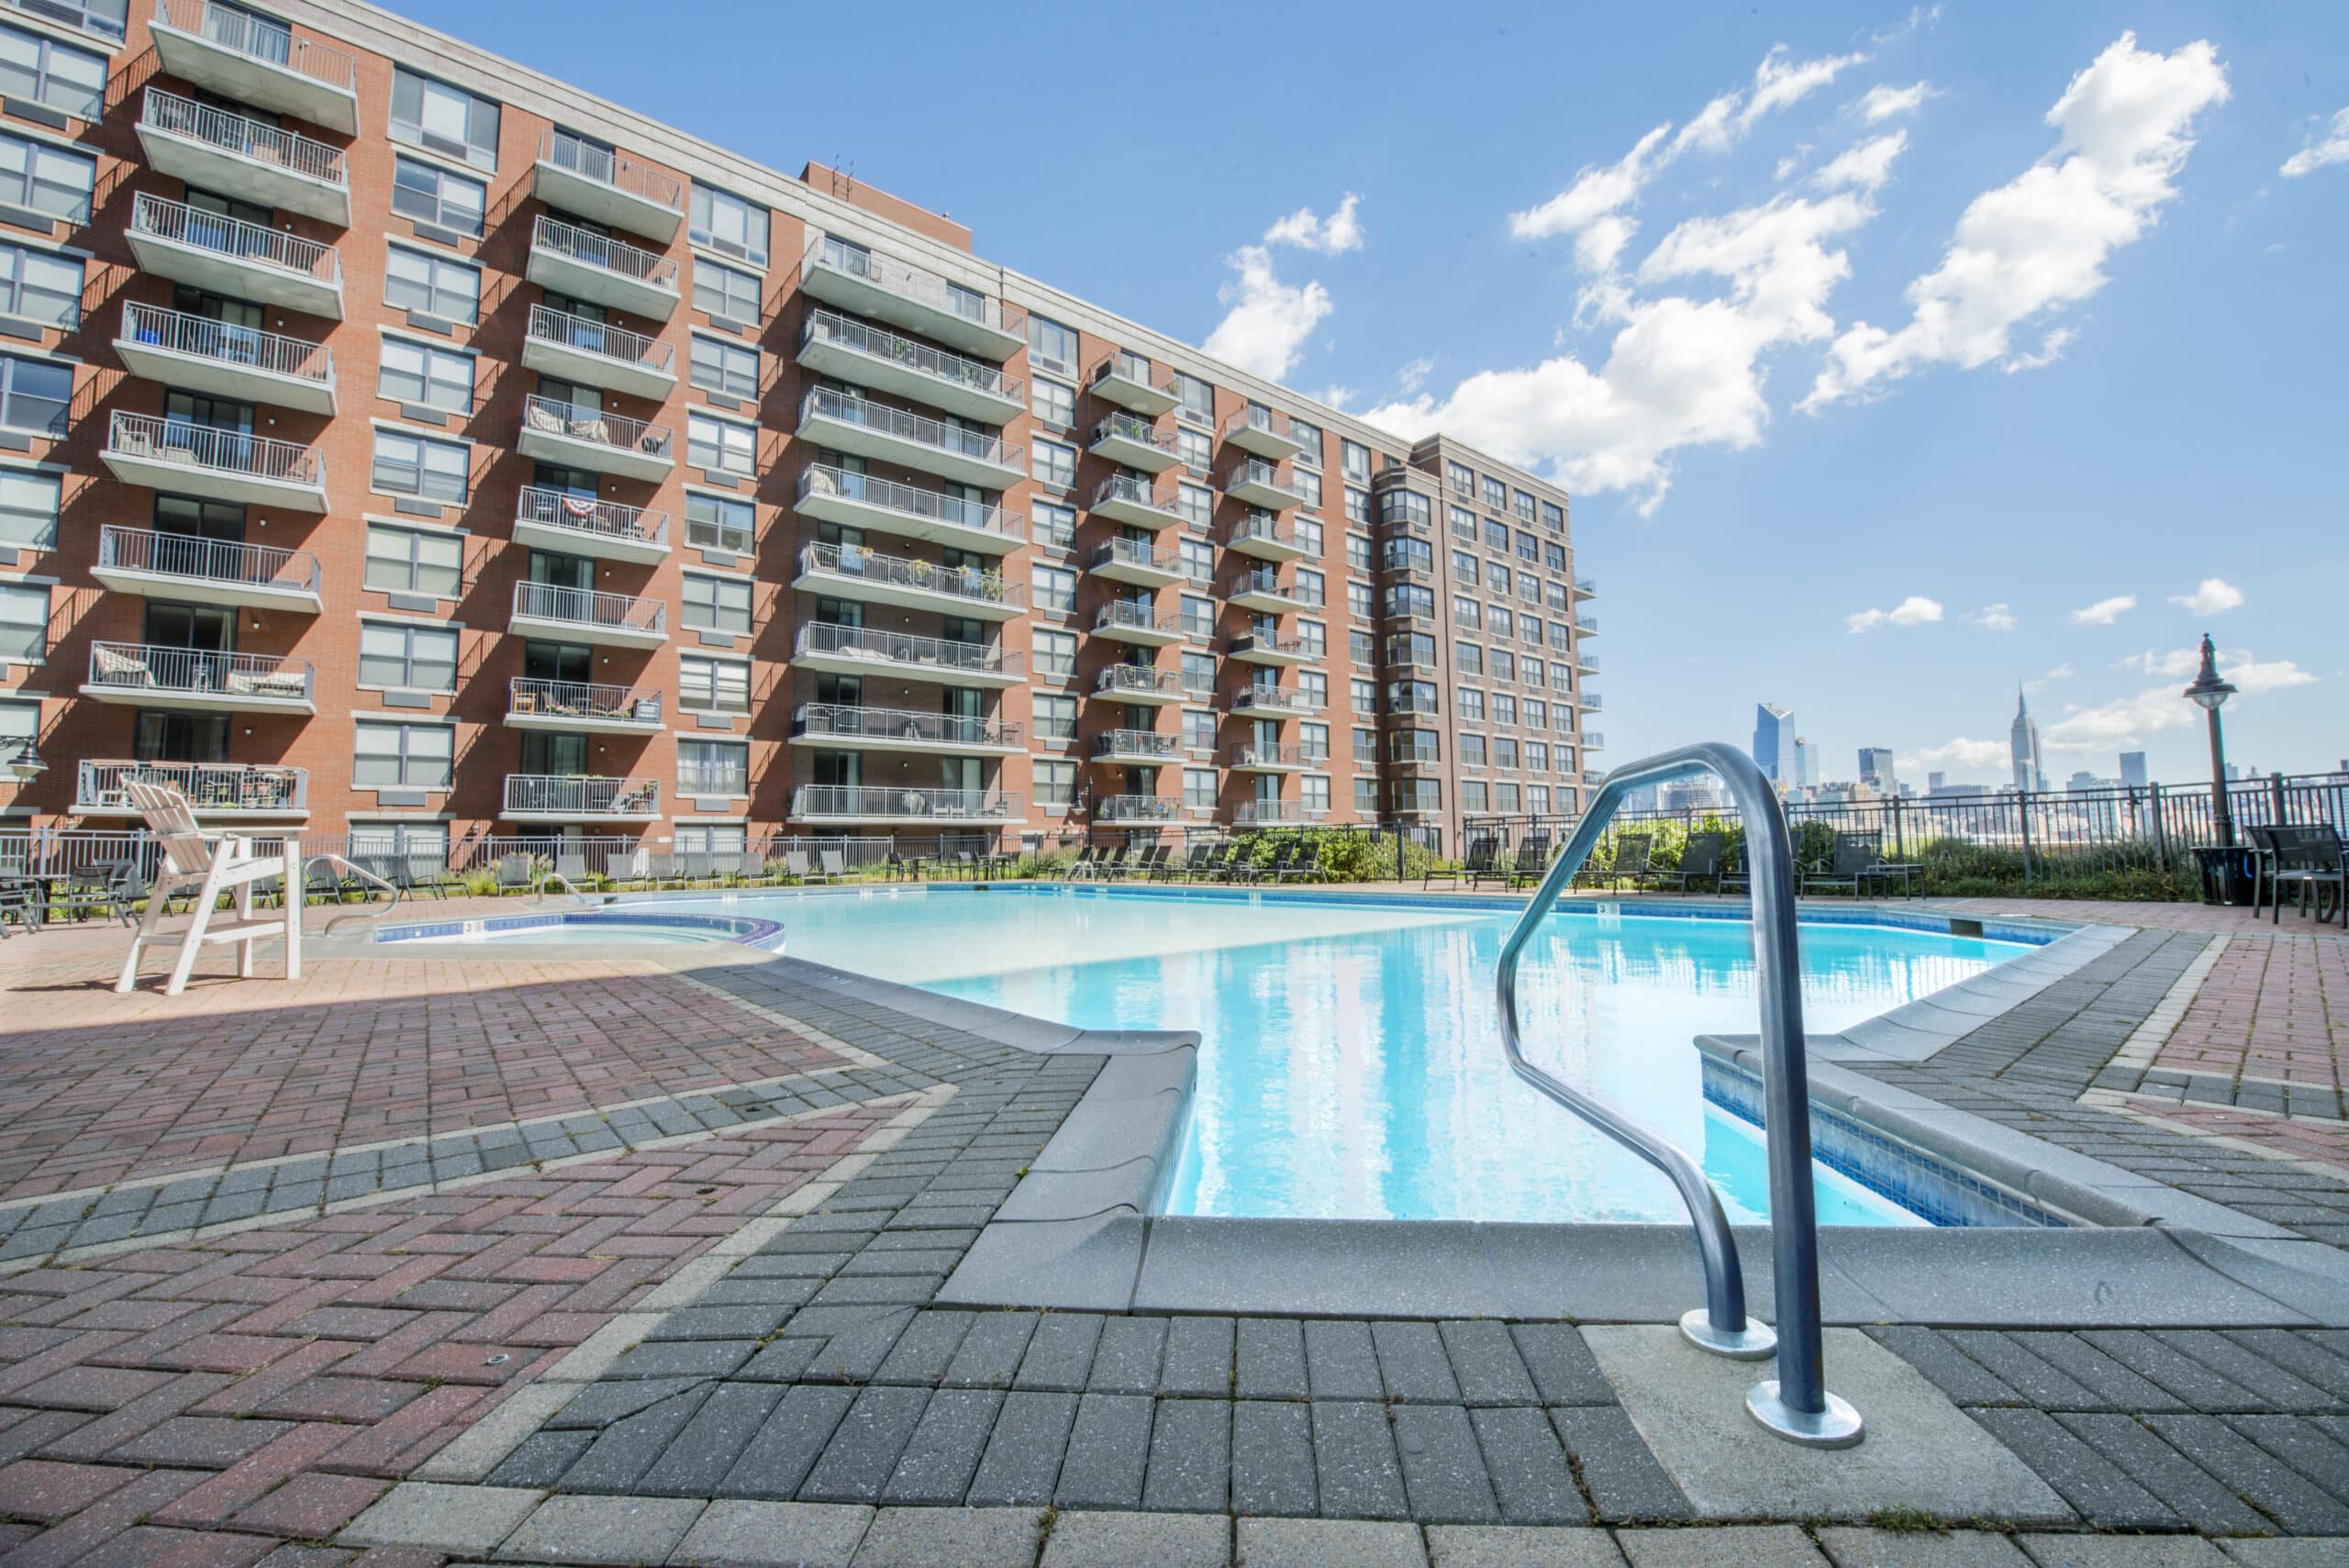 A pool with a brick apartment building in the back